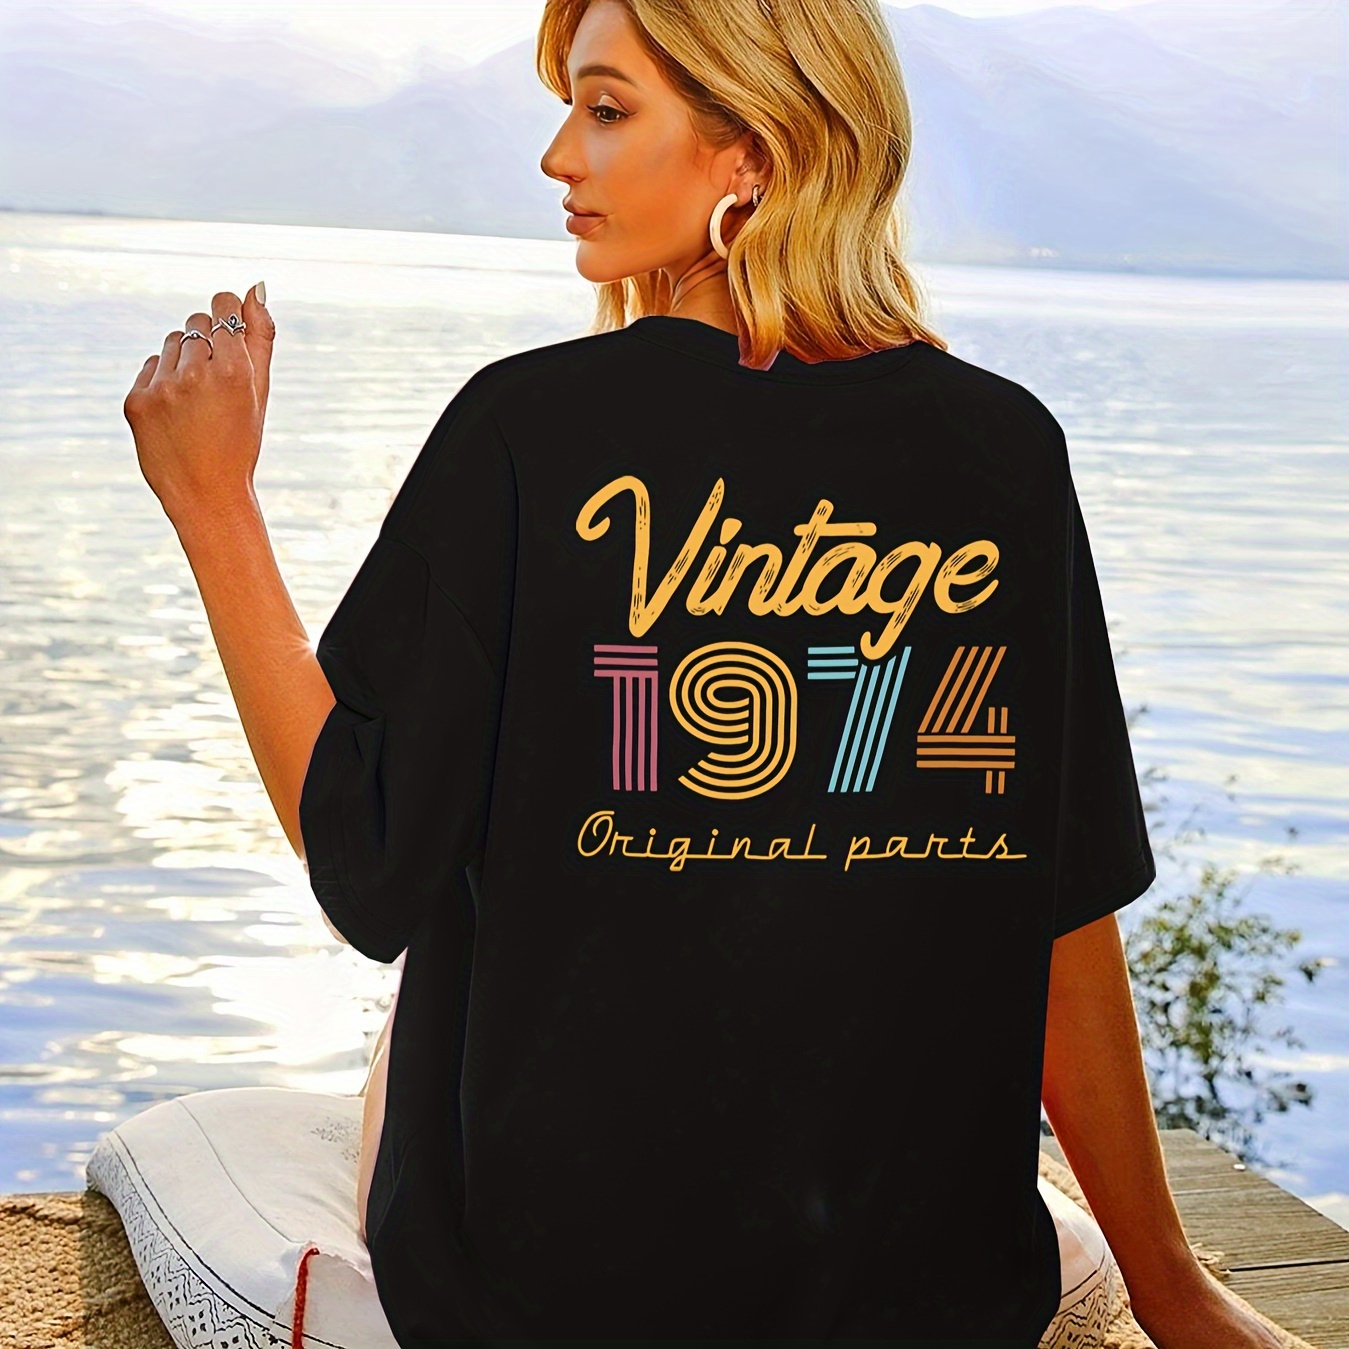 

Vintage 1974 Letter Print Causal Short Sleeves Tops, Fashion Personality Round Neck Sports T-shirt, Women's Activewear